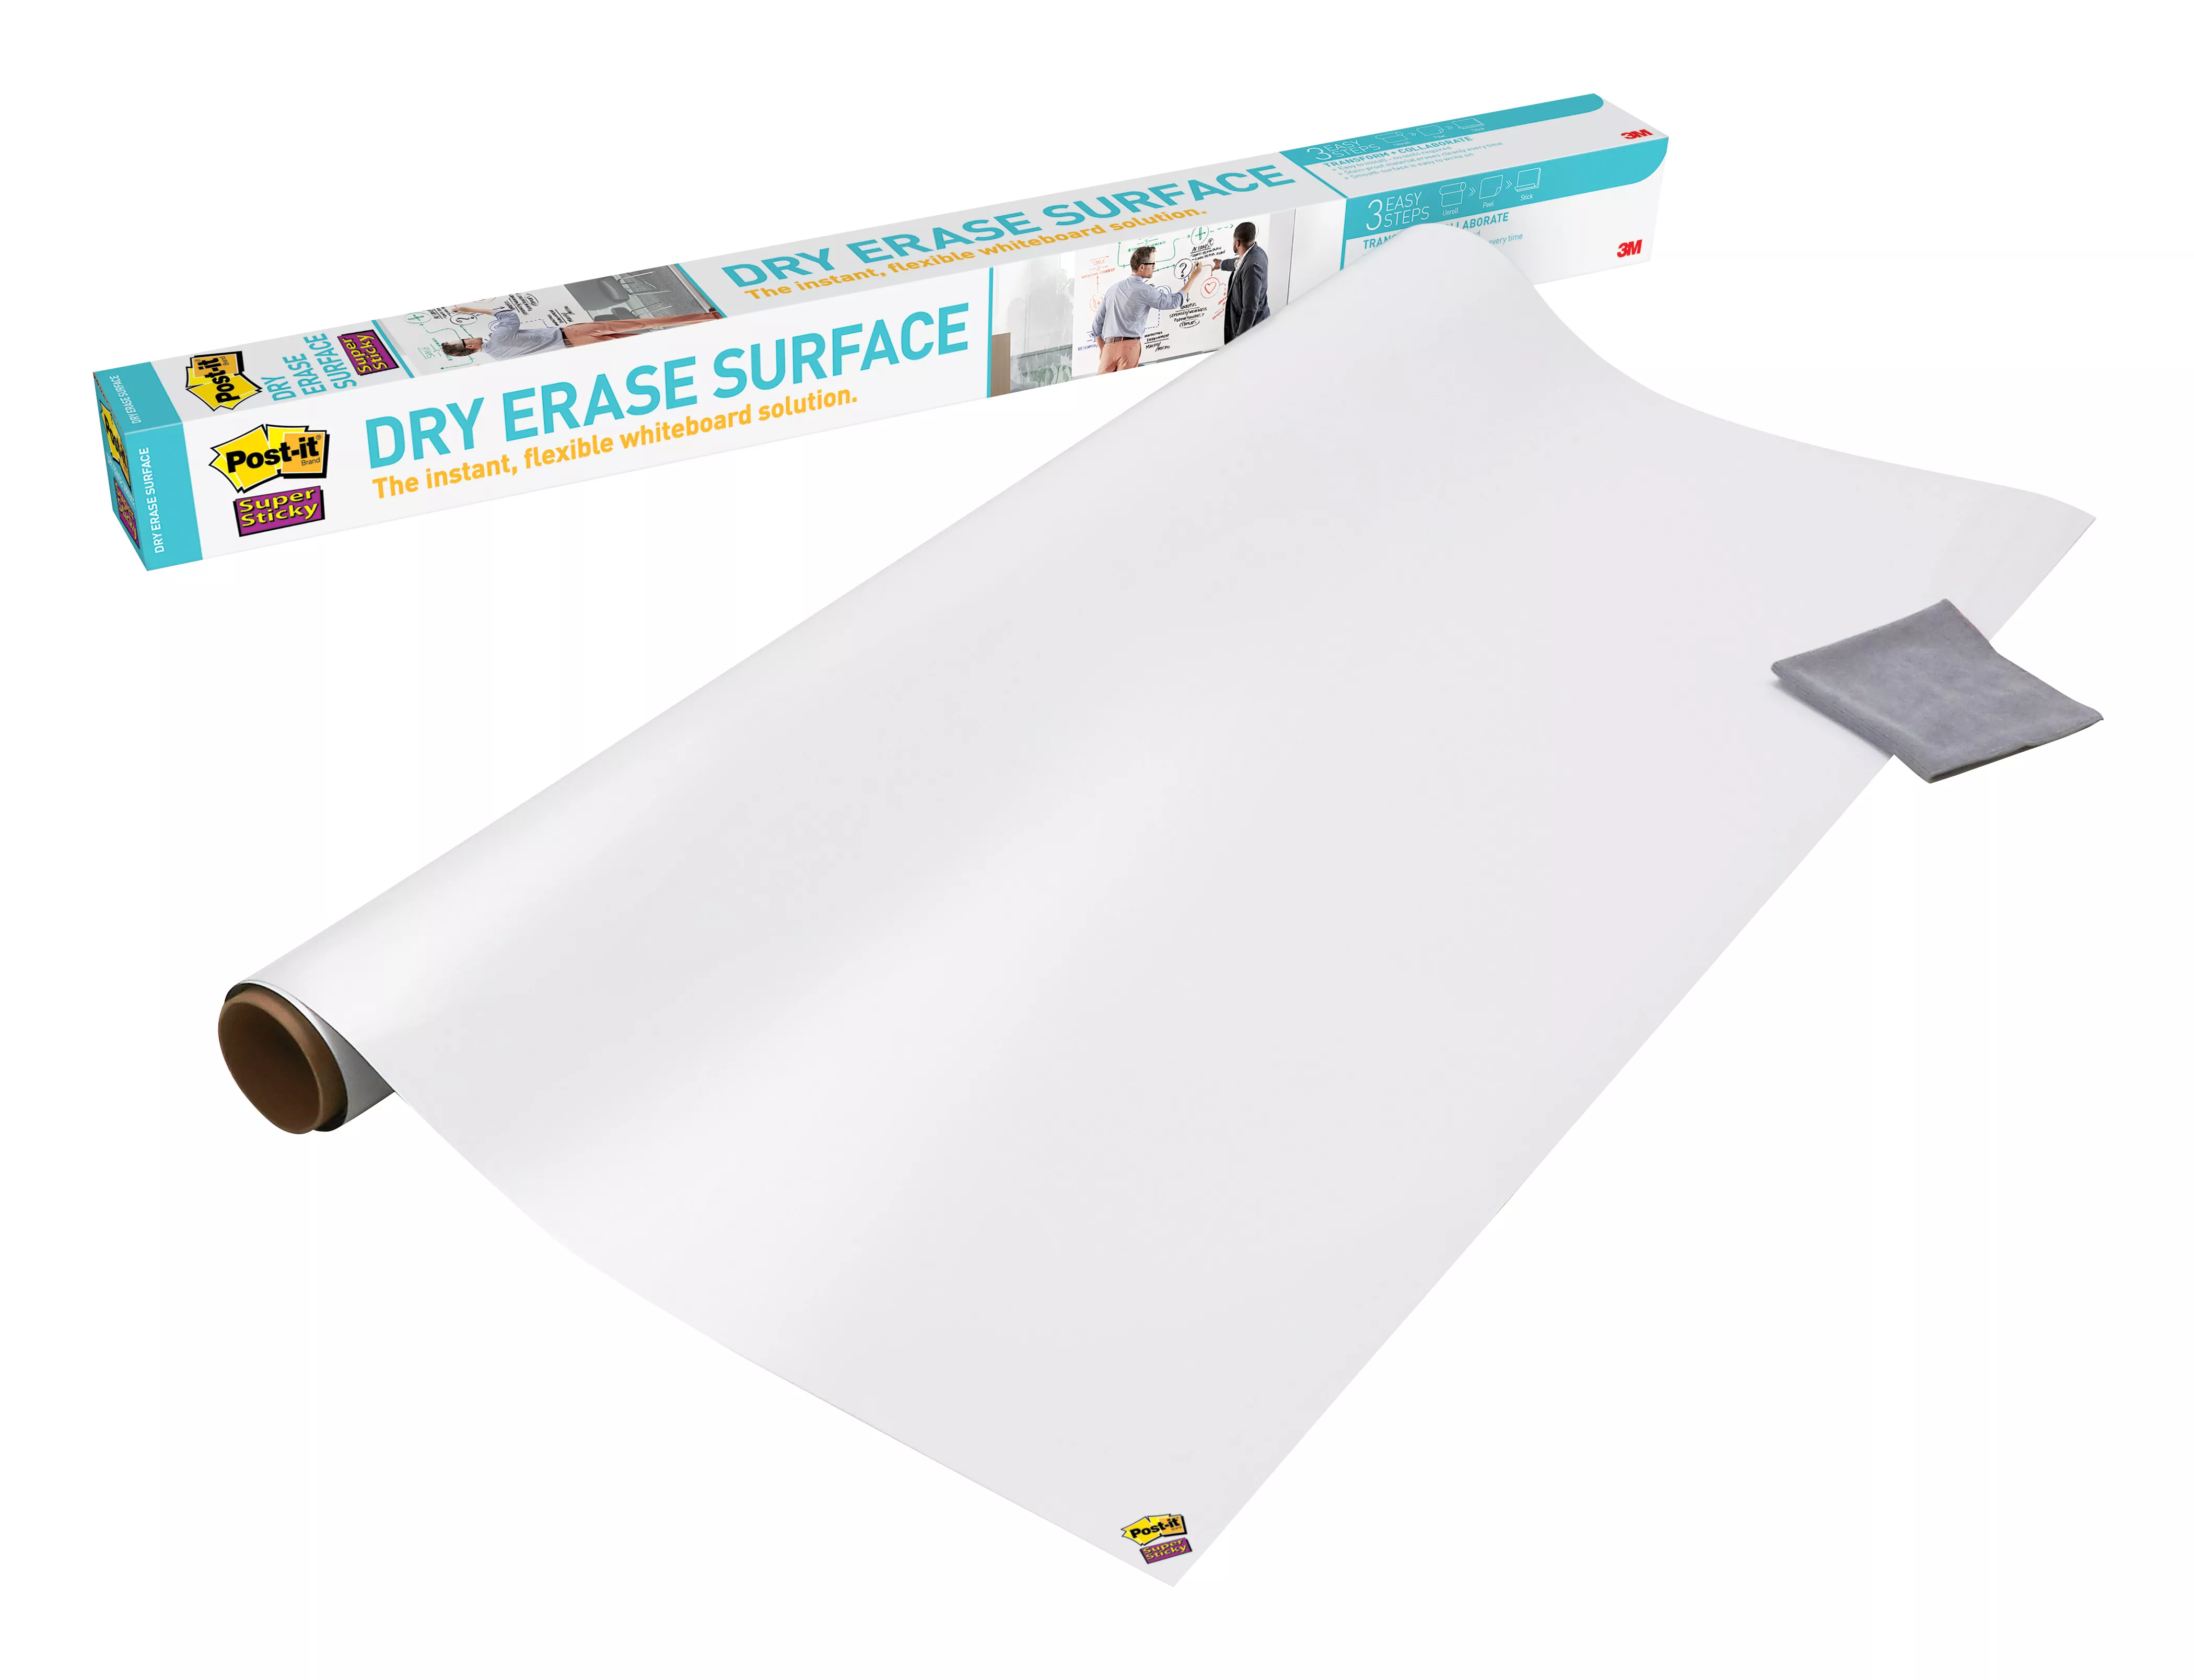 SKU 7100220642 | Post-it® Dry Erase Surface DEF6x4